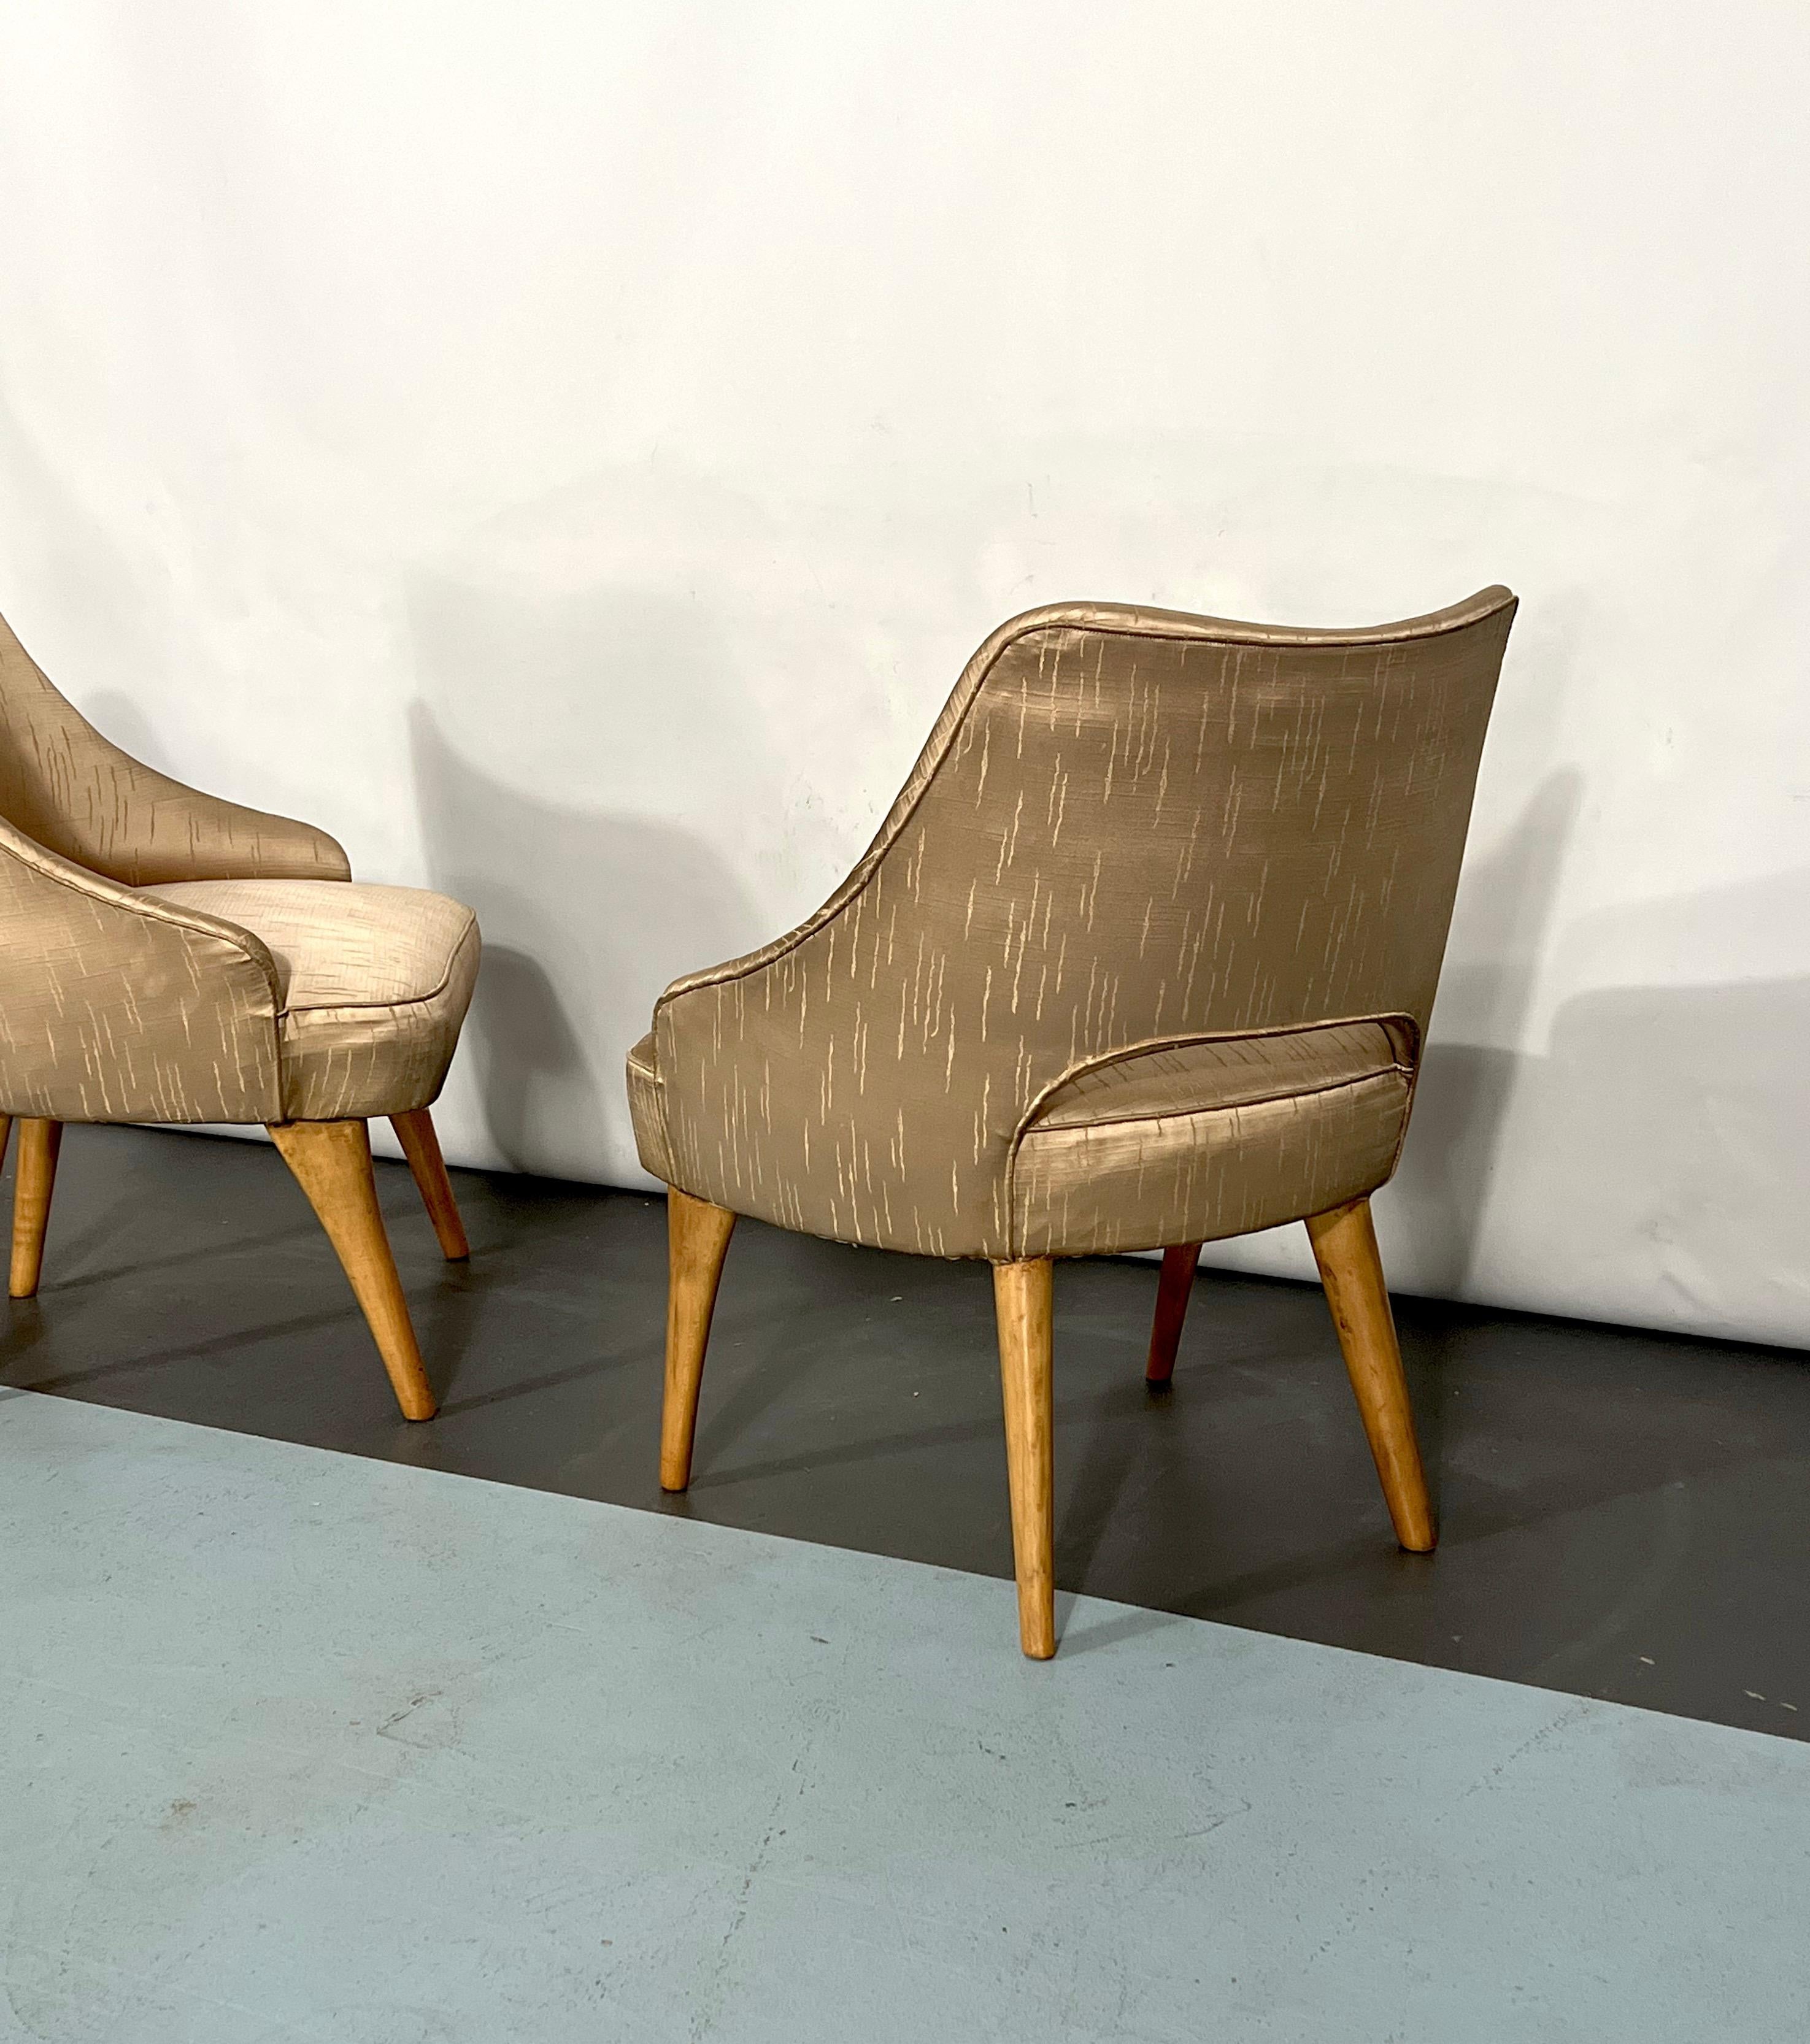 Italian Mid-Century Bedroom Chairs from 50s, Set of Two For Sale 2